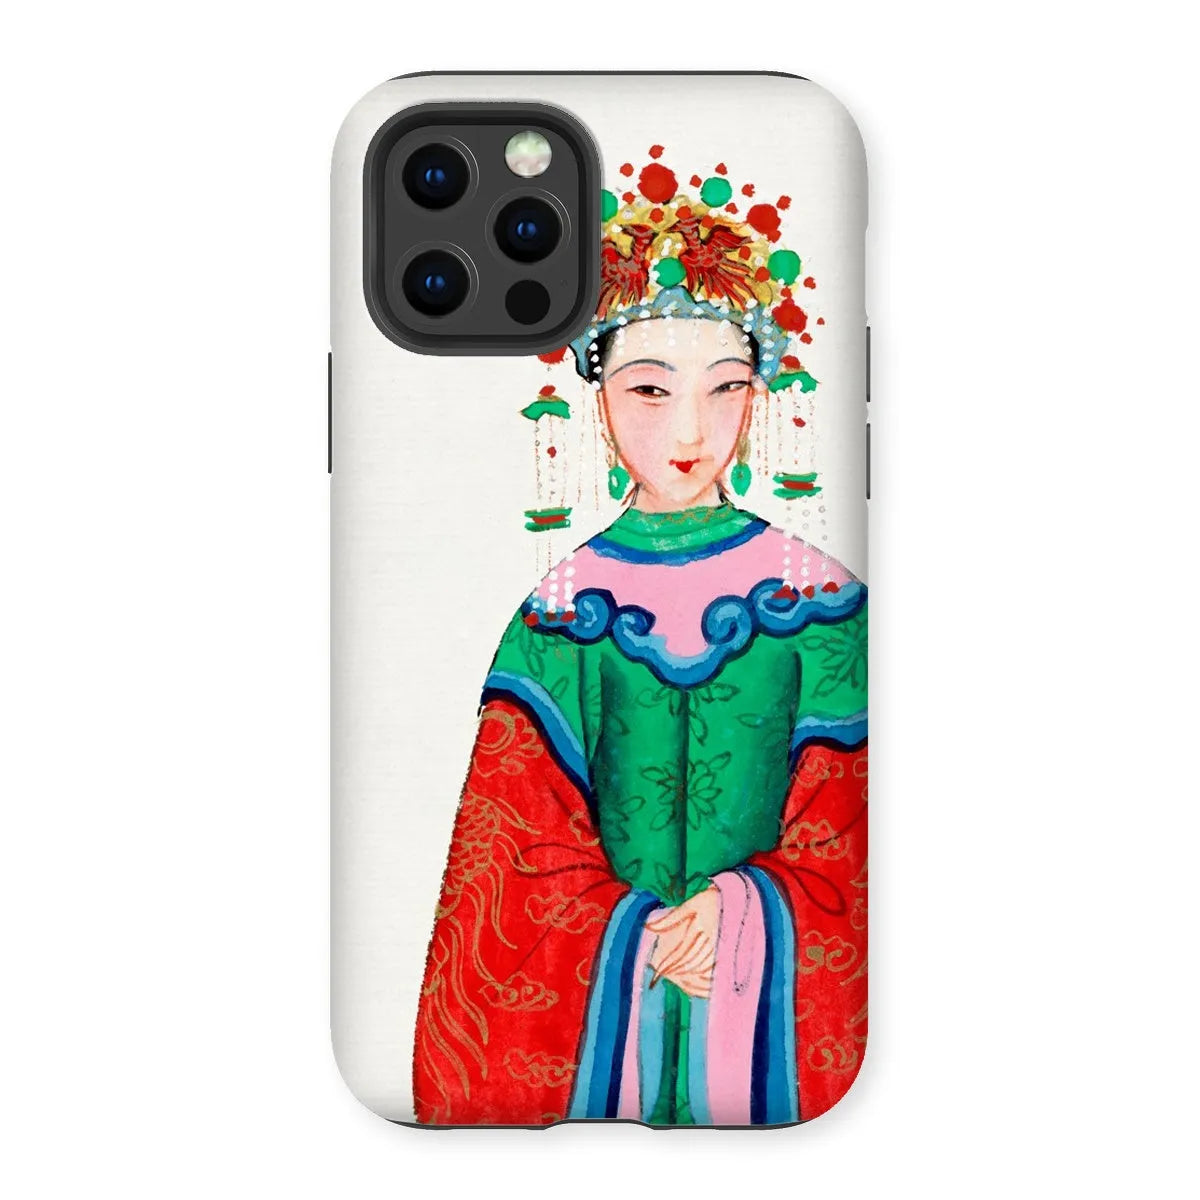 Imperial Princess - Chinese Aesthetic Painting Phone Case - Iphone 12 Pro / Matte - Mobile Phone Cases - Aesthetic Art